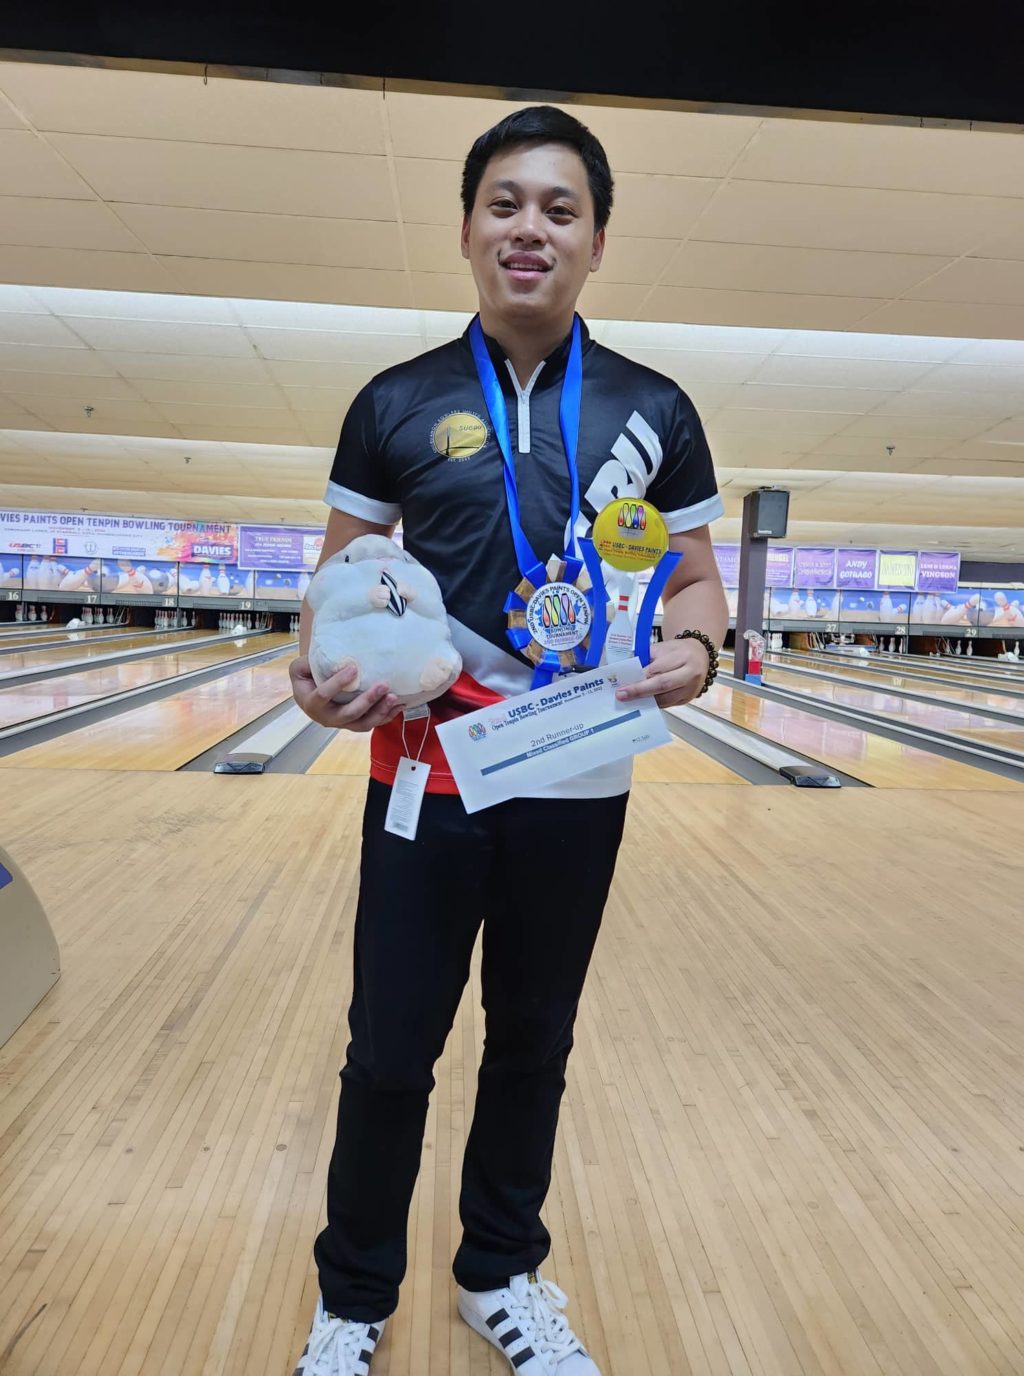 Heber Alqueza of SUGBU is third overall in the USBC Davies Paints Open Tenpin Bowling tilt in Manila